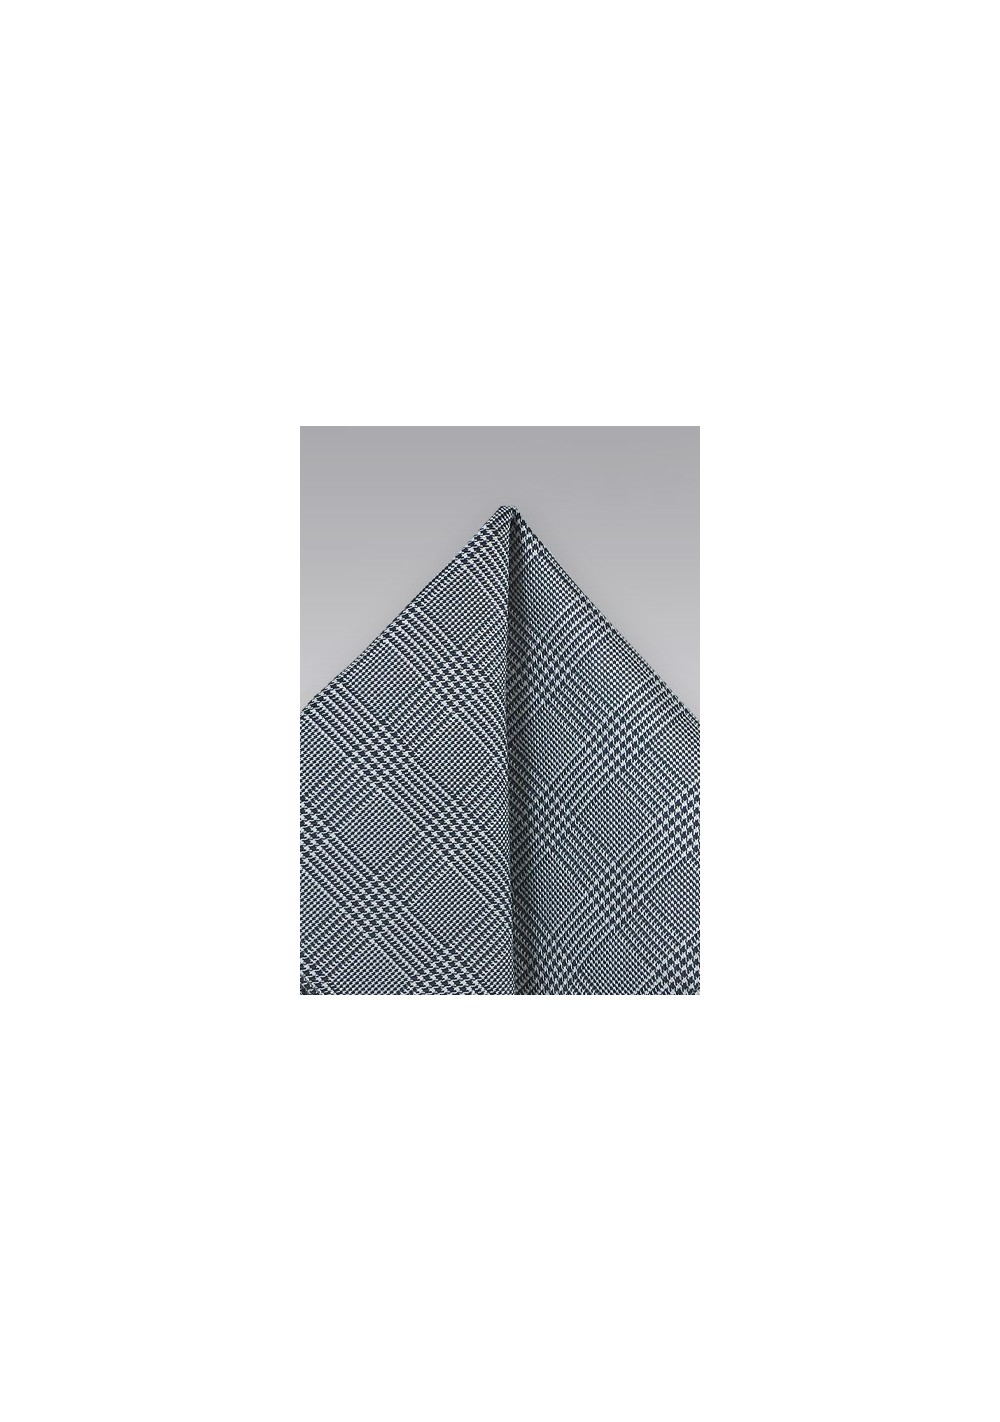 Charcoal Pocket Square with Glen Check